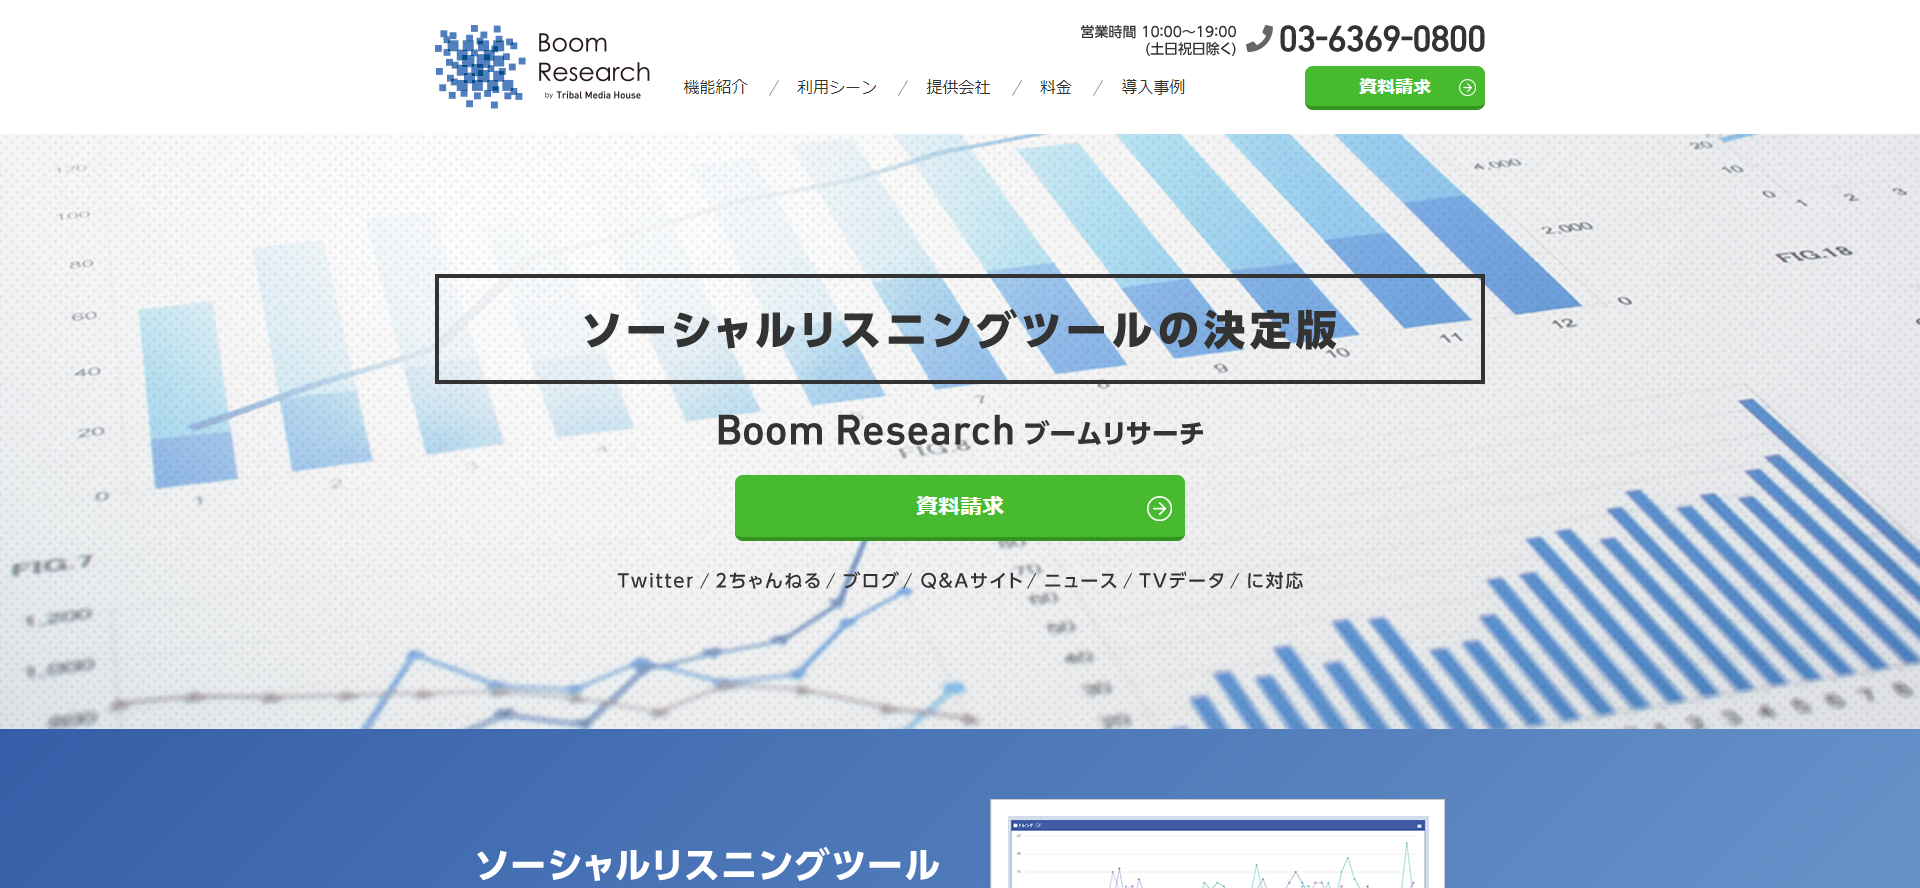 Boom Research.png